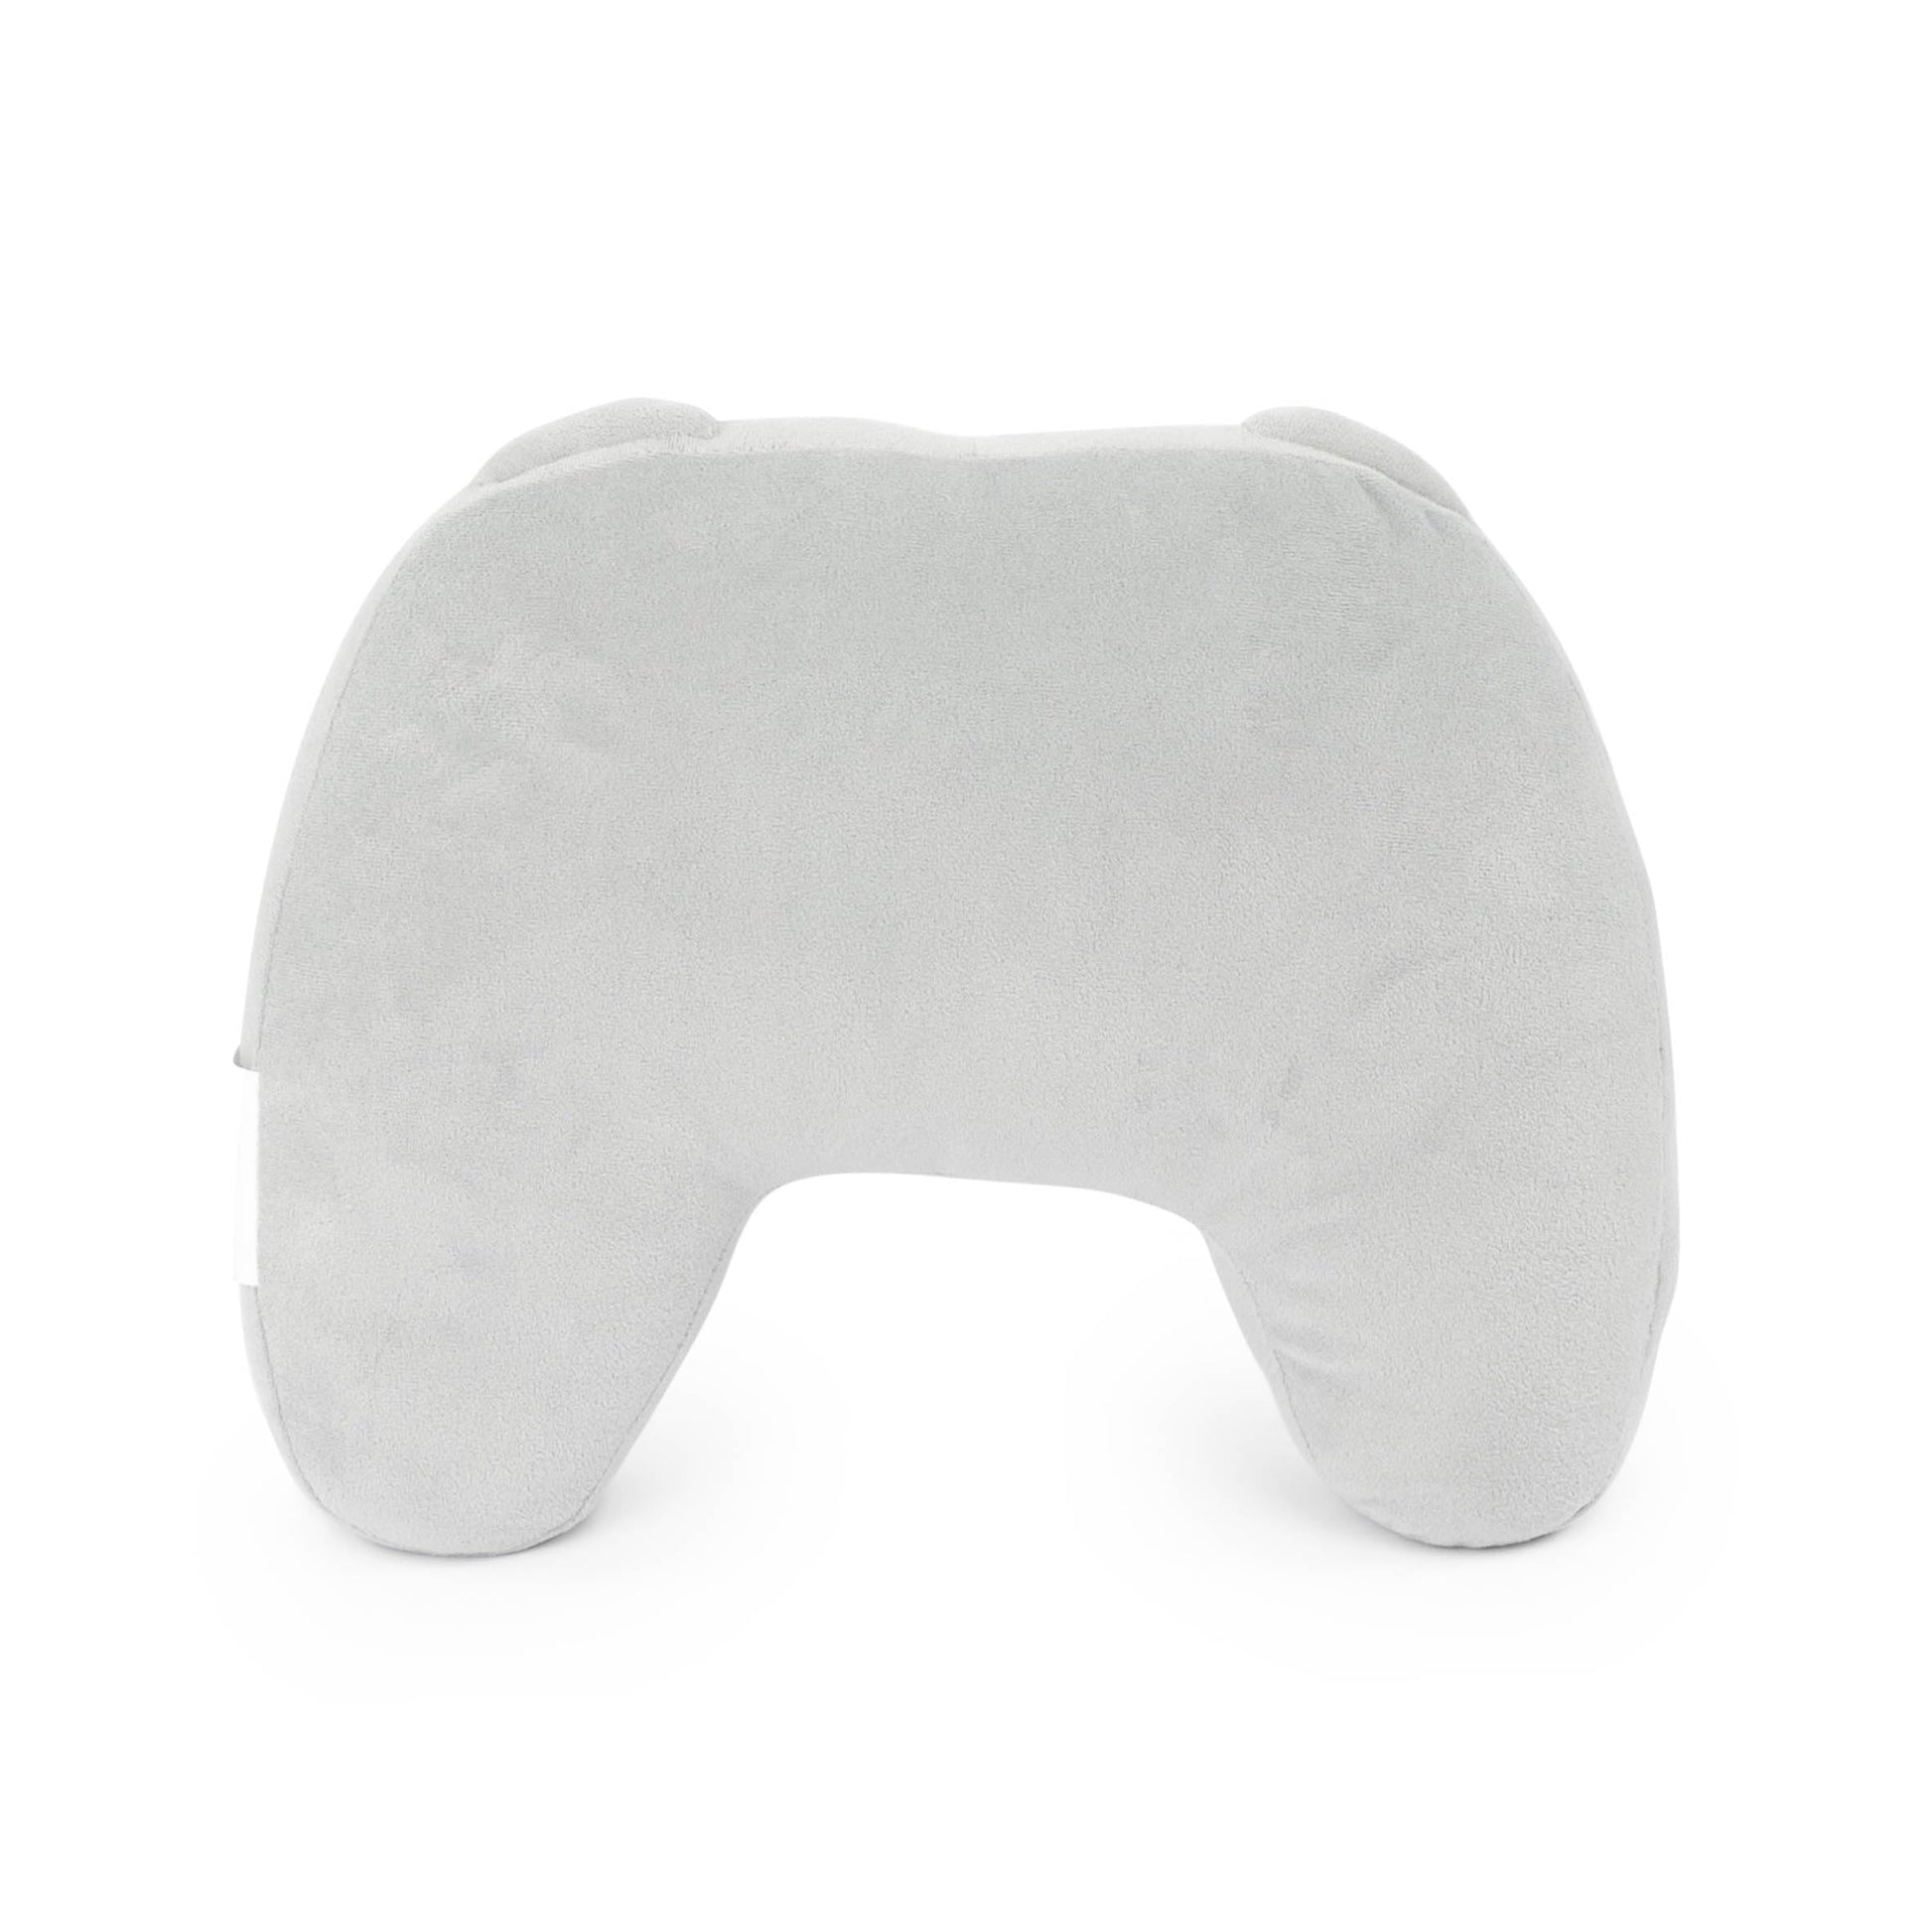 Jay Franco Xbox Controller Plush Shaped Pillow - Super Soft Gaming Pillow - Polyester Microfiber, 11 Inches - amzGamess